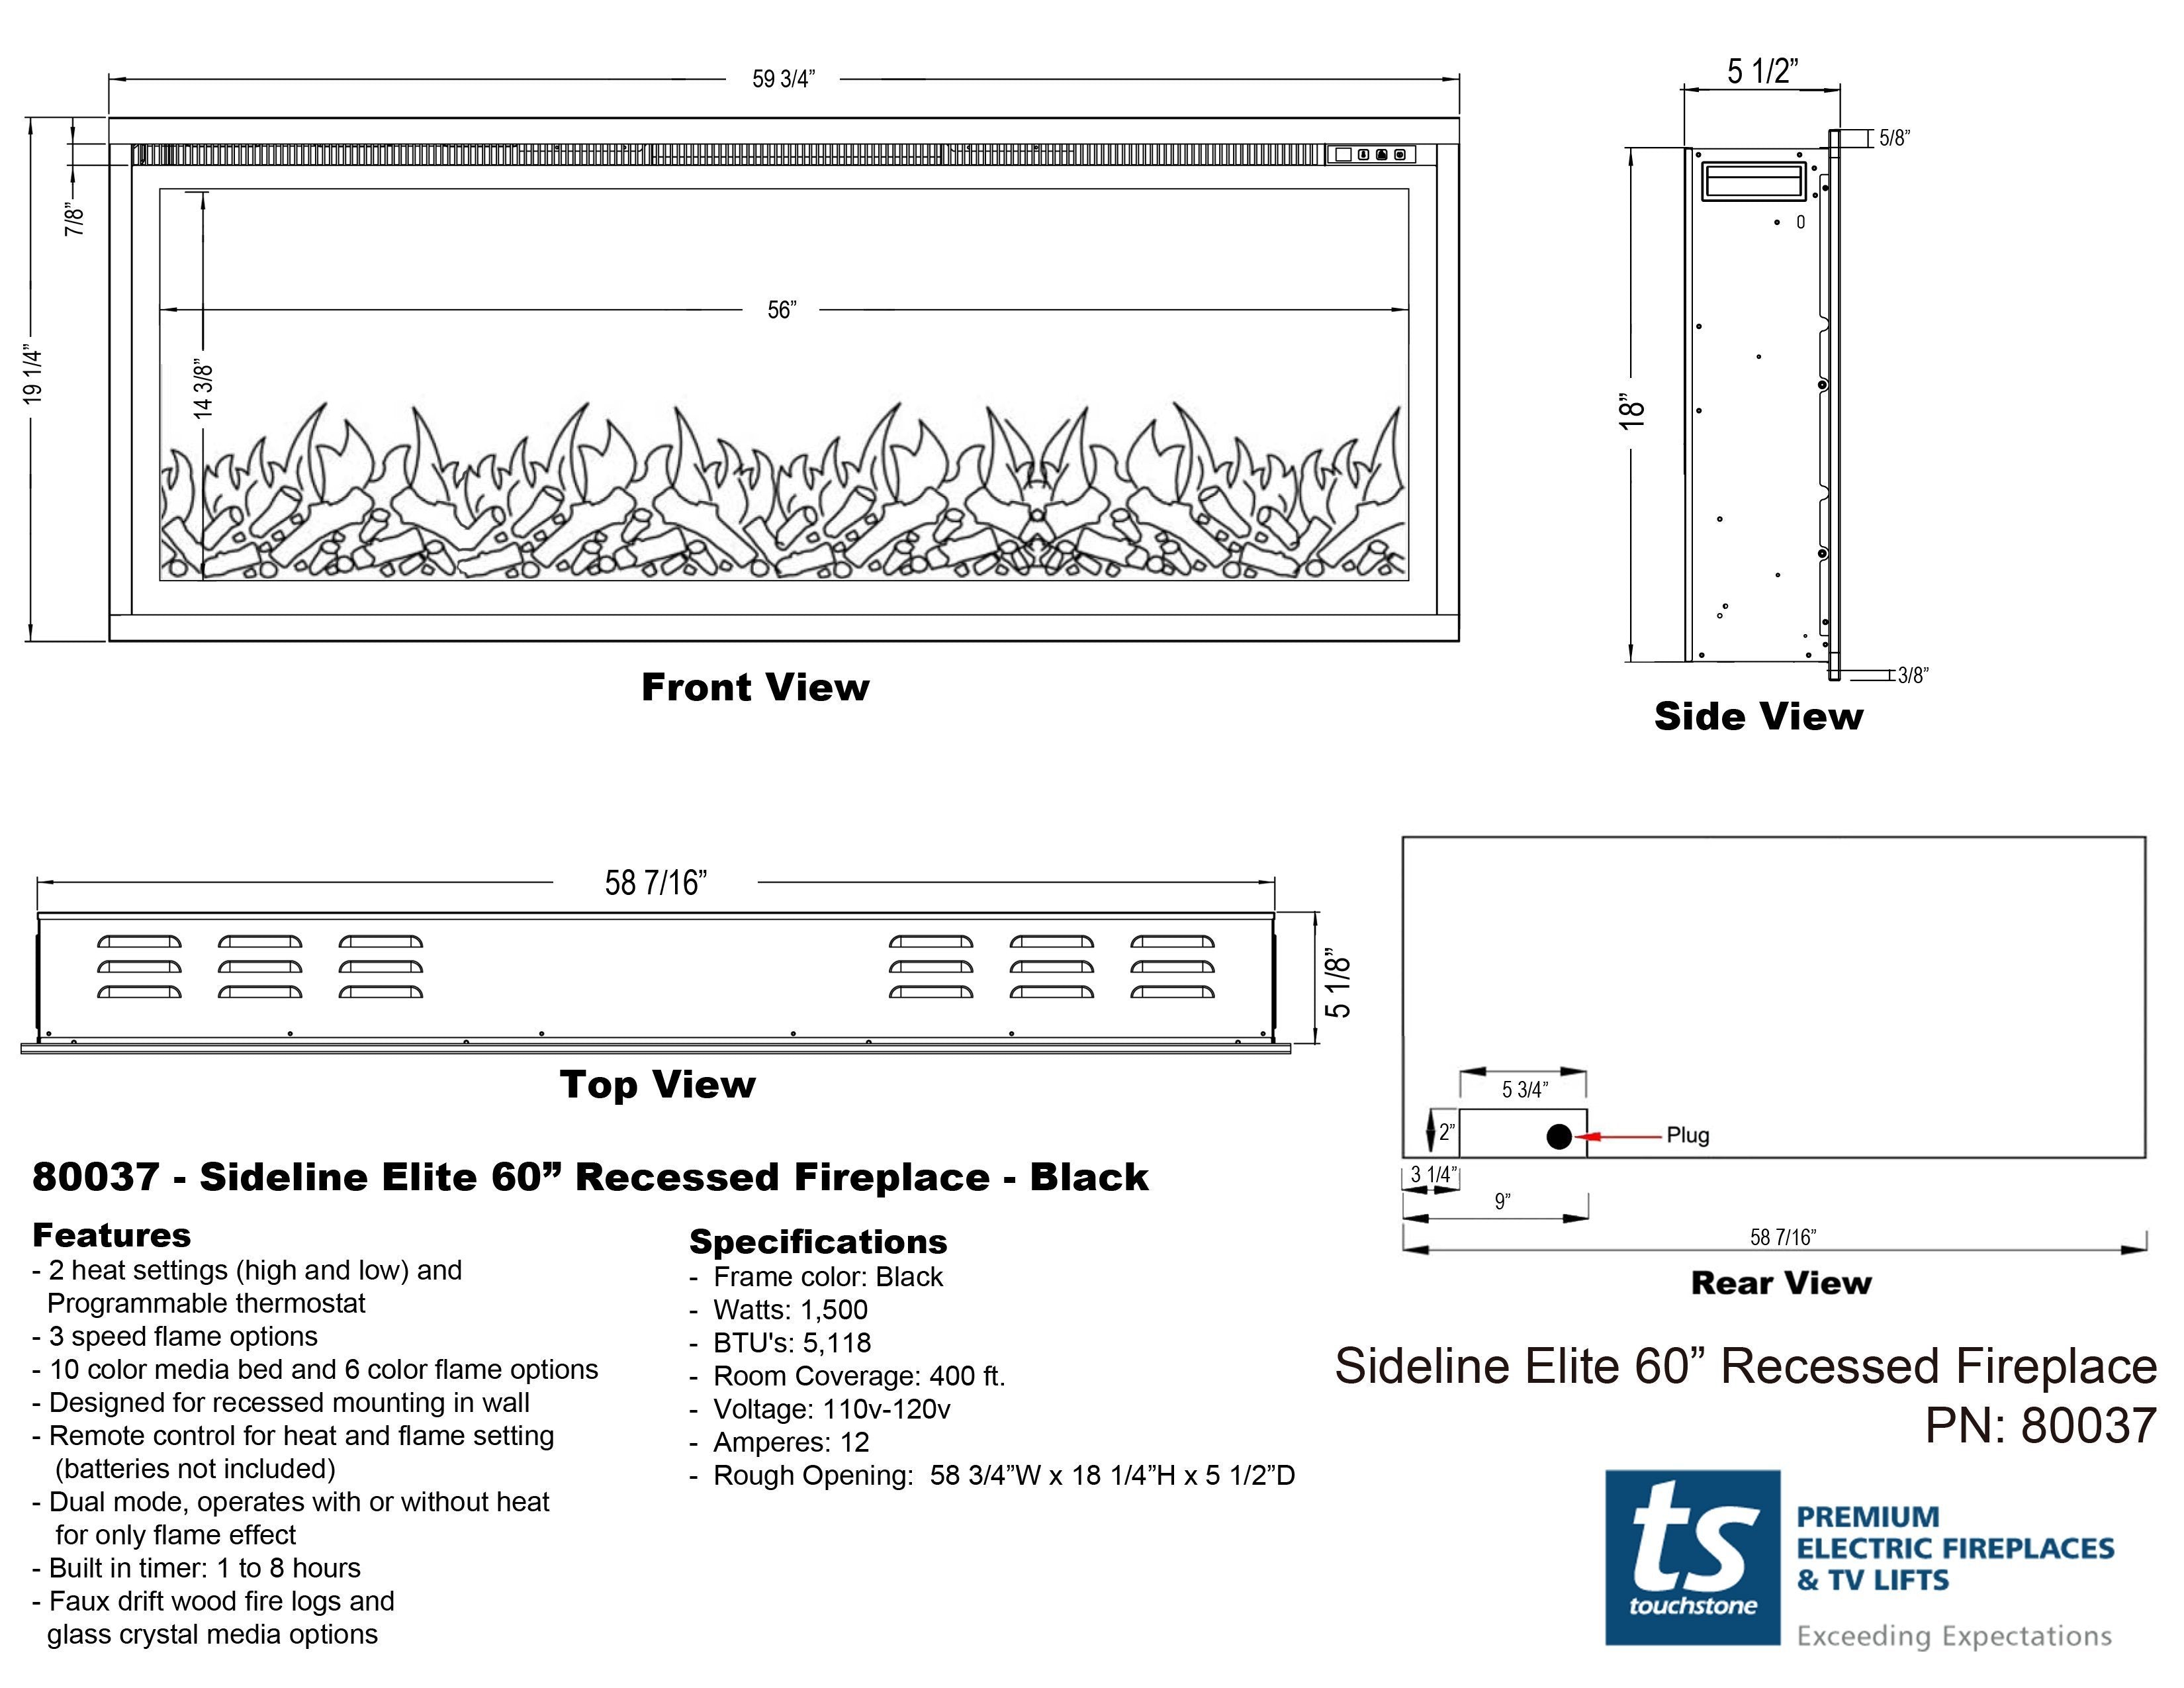 Sideline Elite 60 Refurbished Recessed Electric Fireplace specifications